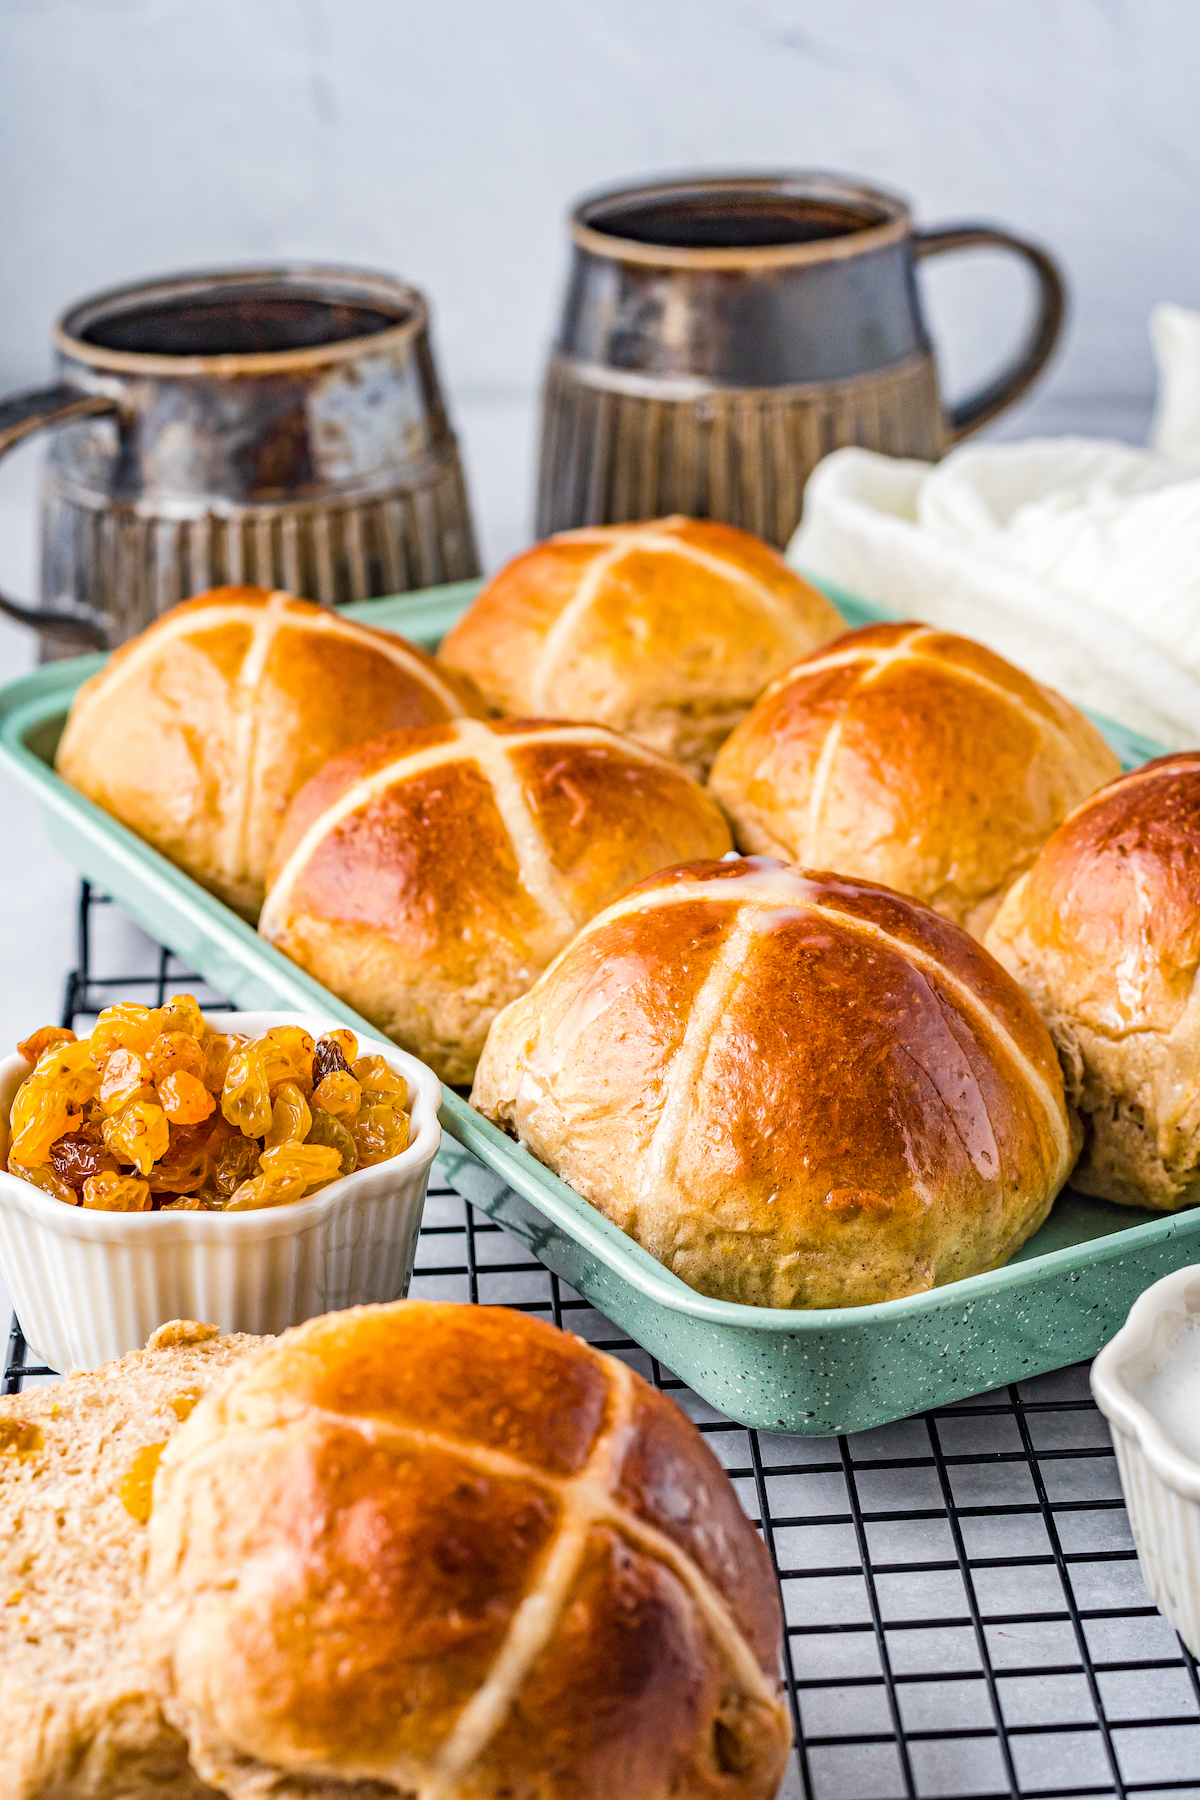 Six baked buns on a plate, cooling on a baking rack, with a bowl of golden raisins nearby.